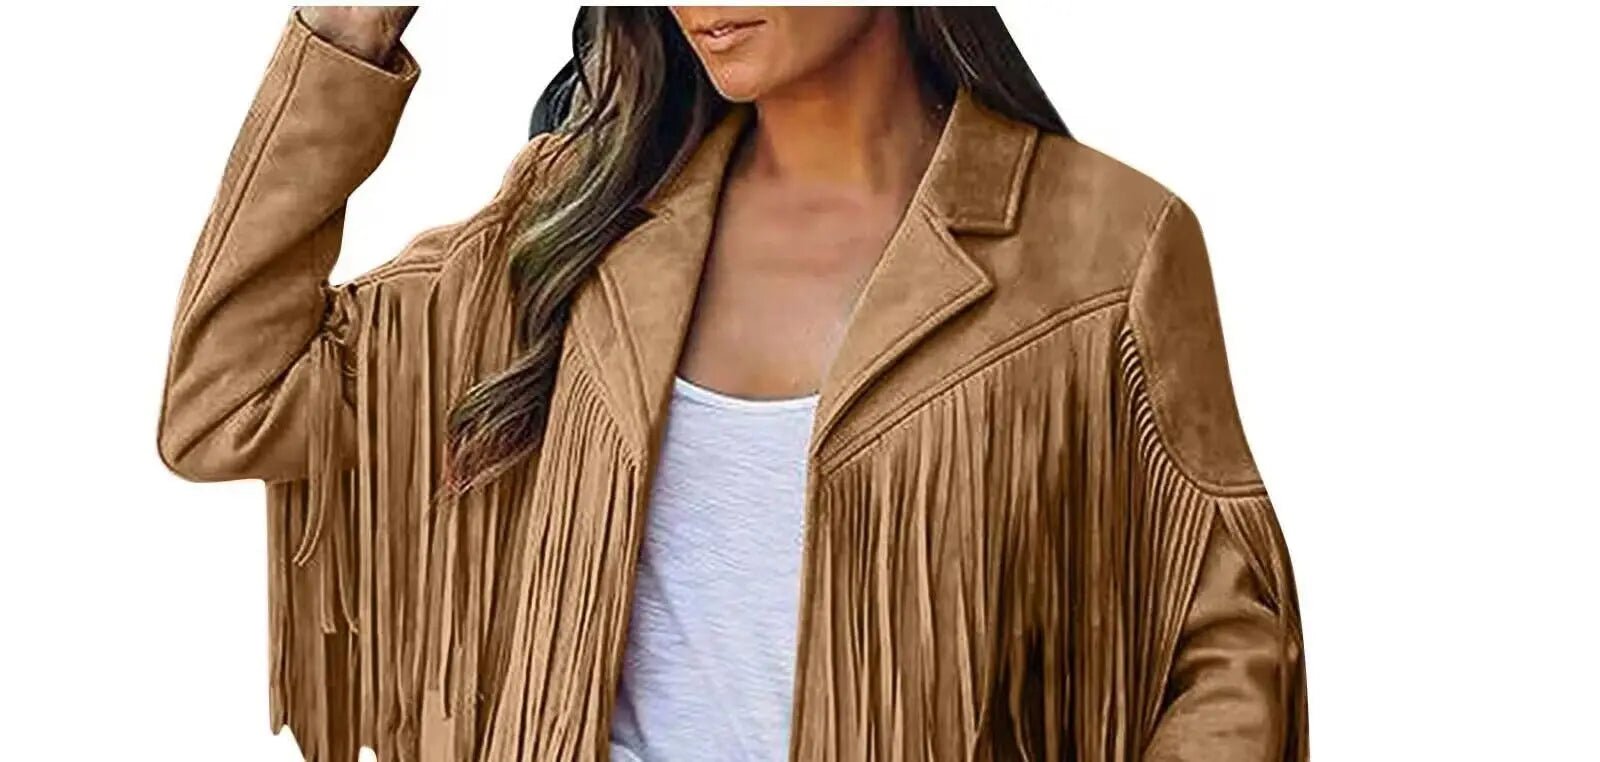 Stylish Crop Jacket for Women - A Trendy Bomber Jacket Spring and Fall - CasualFlowshop